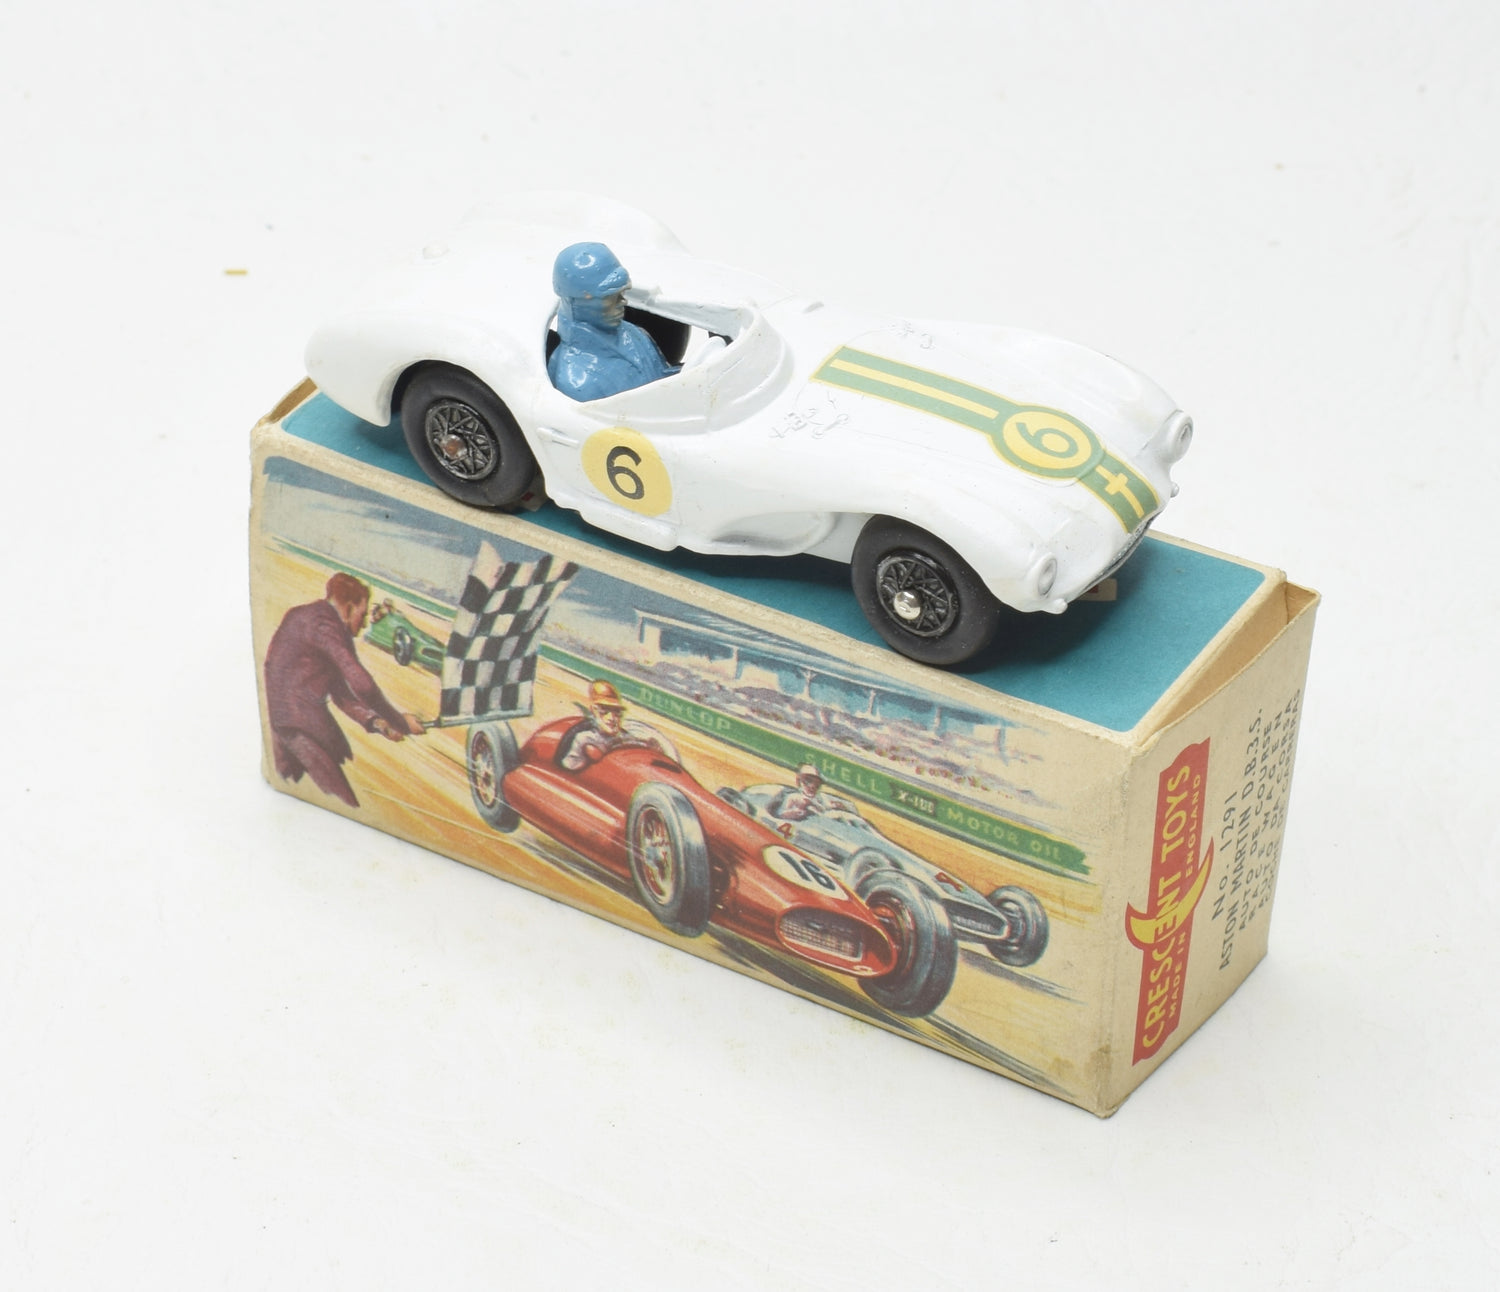 Crescent toys 1291 Aston Martin DB3s G.P Very Near Mint/Boxed (The 'Geneva' Collection)